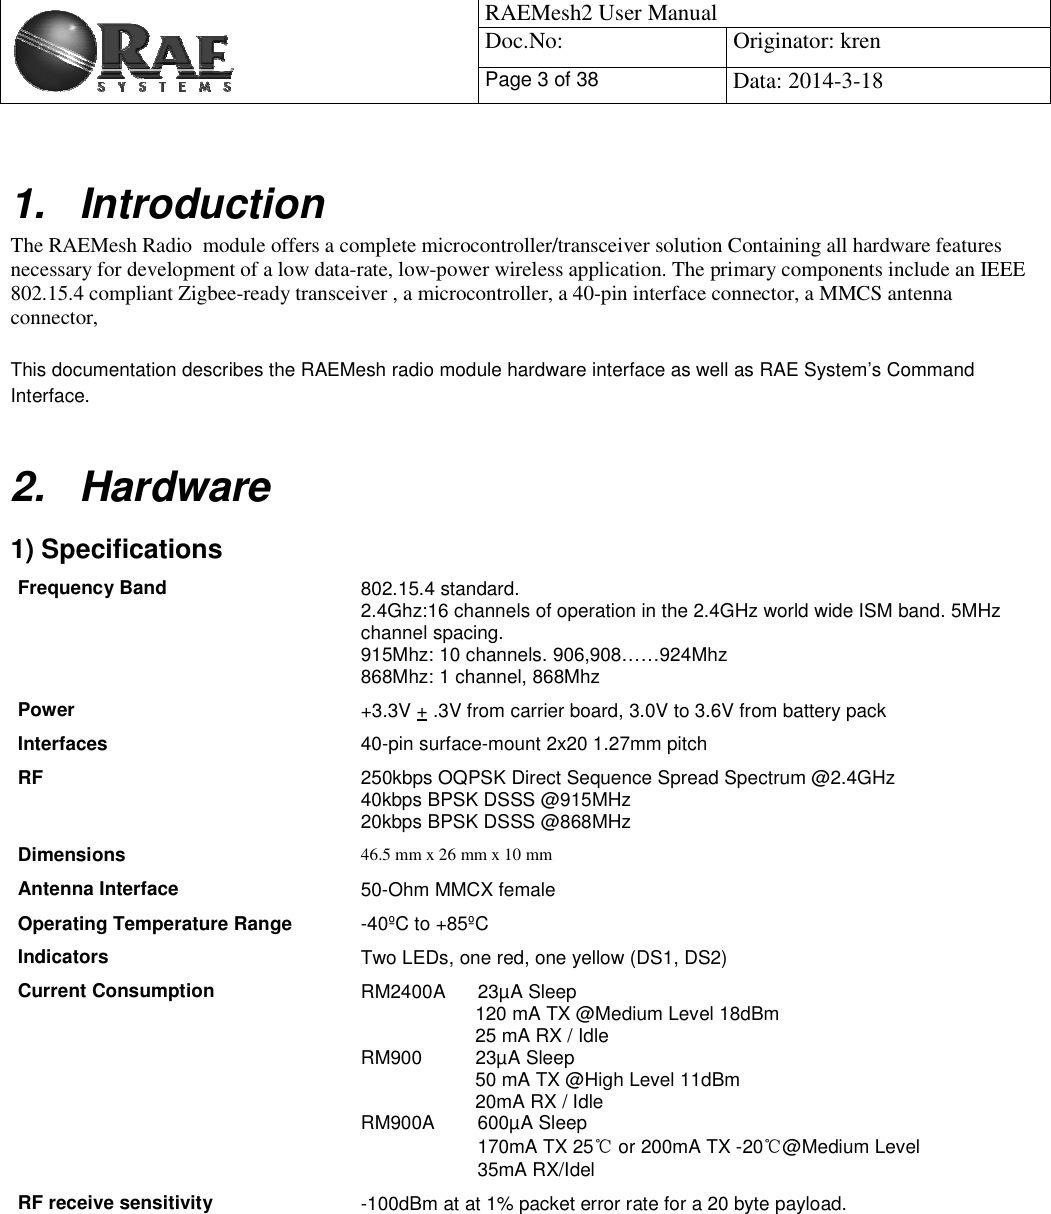                                            RAEMesh2 User Manual Doc.No: Originator: kren Page 3 of 38 Data: 2014-3-18   1. Introduction The RAEMesh Radio  module offers a complete microcontroller/transceiver solution Containing all hardware features necessary for development of a low data-rate, low-power wireless application. The primary components include an IEEE 802.15.4 compliant Zigbee-ready transceiver , a microcontroller, a 40-pin interface connector, a MMCS antenna connector,   This documentation describes the RAEMesh radio module hardware interface as well as RAE System’s Command Interface.  2. Hardware 1) Specifications Frequency Band  802.15.4 standard. 2.4Ghz:16 channels of operation in the 2.4GHz world wide ISM band. 5MHz channel spacing. 915Mhz: 10 channels. 906,908……924Mhz  868Mhz: 1 channel, 868Mhz Power  +3.3V + .3V from carrier board, 3.0V to 3.6V from battery pack  Interfaces 40-pin surface-mount 2x20 1.27mm pitch RF  250kbps OQPSK Direct Sequence Spread Spectrum @2.4GHz 40kbps BPSK DSSS @915MHz 20kbps BPSK DSSS @868MHz Dimensions  46.5 mm x 26 mm x 10 mm Antenna Interface  50-Ohm MMCX female Operating Temperature Range -40ºC to +85ºC Indicators Two LEDs, one red, one yellow (DS1, DS2) Current Consumption  RM2400A      23µA Sleep 120 mA TX @Medium Level 18dBm 25 mA RX / Idle RM900          23µA Sleep 50 mA TX @High Level 11dBm 20mA RX / Idle RM900A        600µA Sleep                       170mA TX 25ć or 200mA TX -20ć@Medium Level                       35mA RX/Idel RF receive sensitivity -100dBm at at 1% packet error rate for a 20 byte payload.  